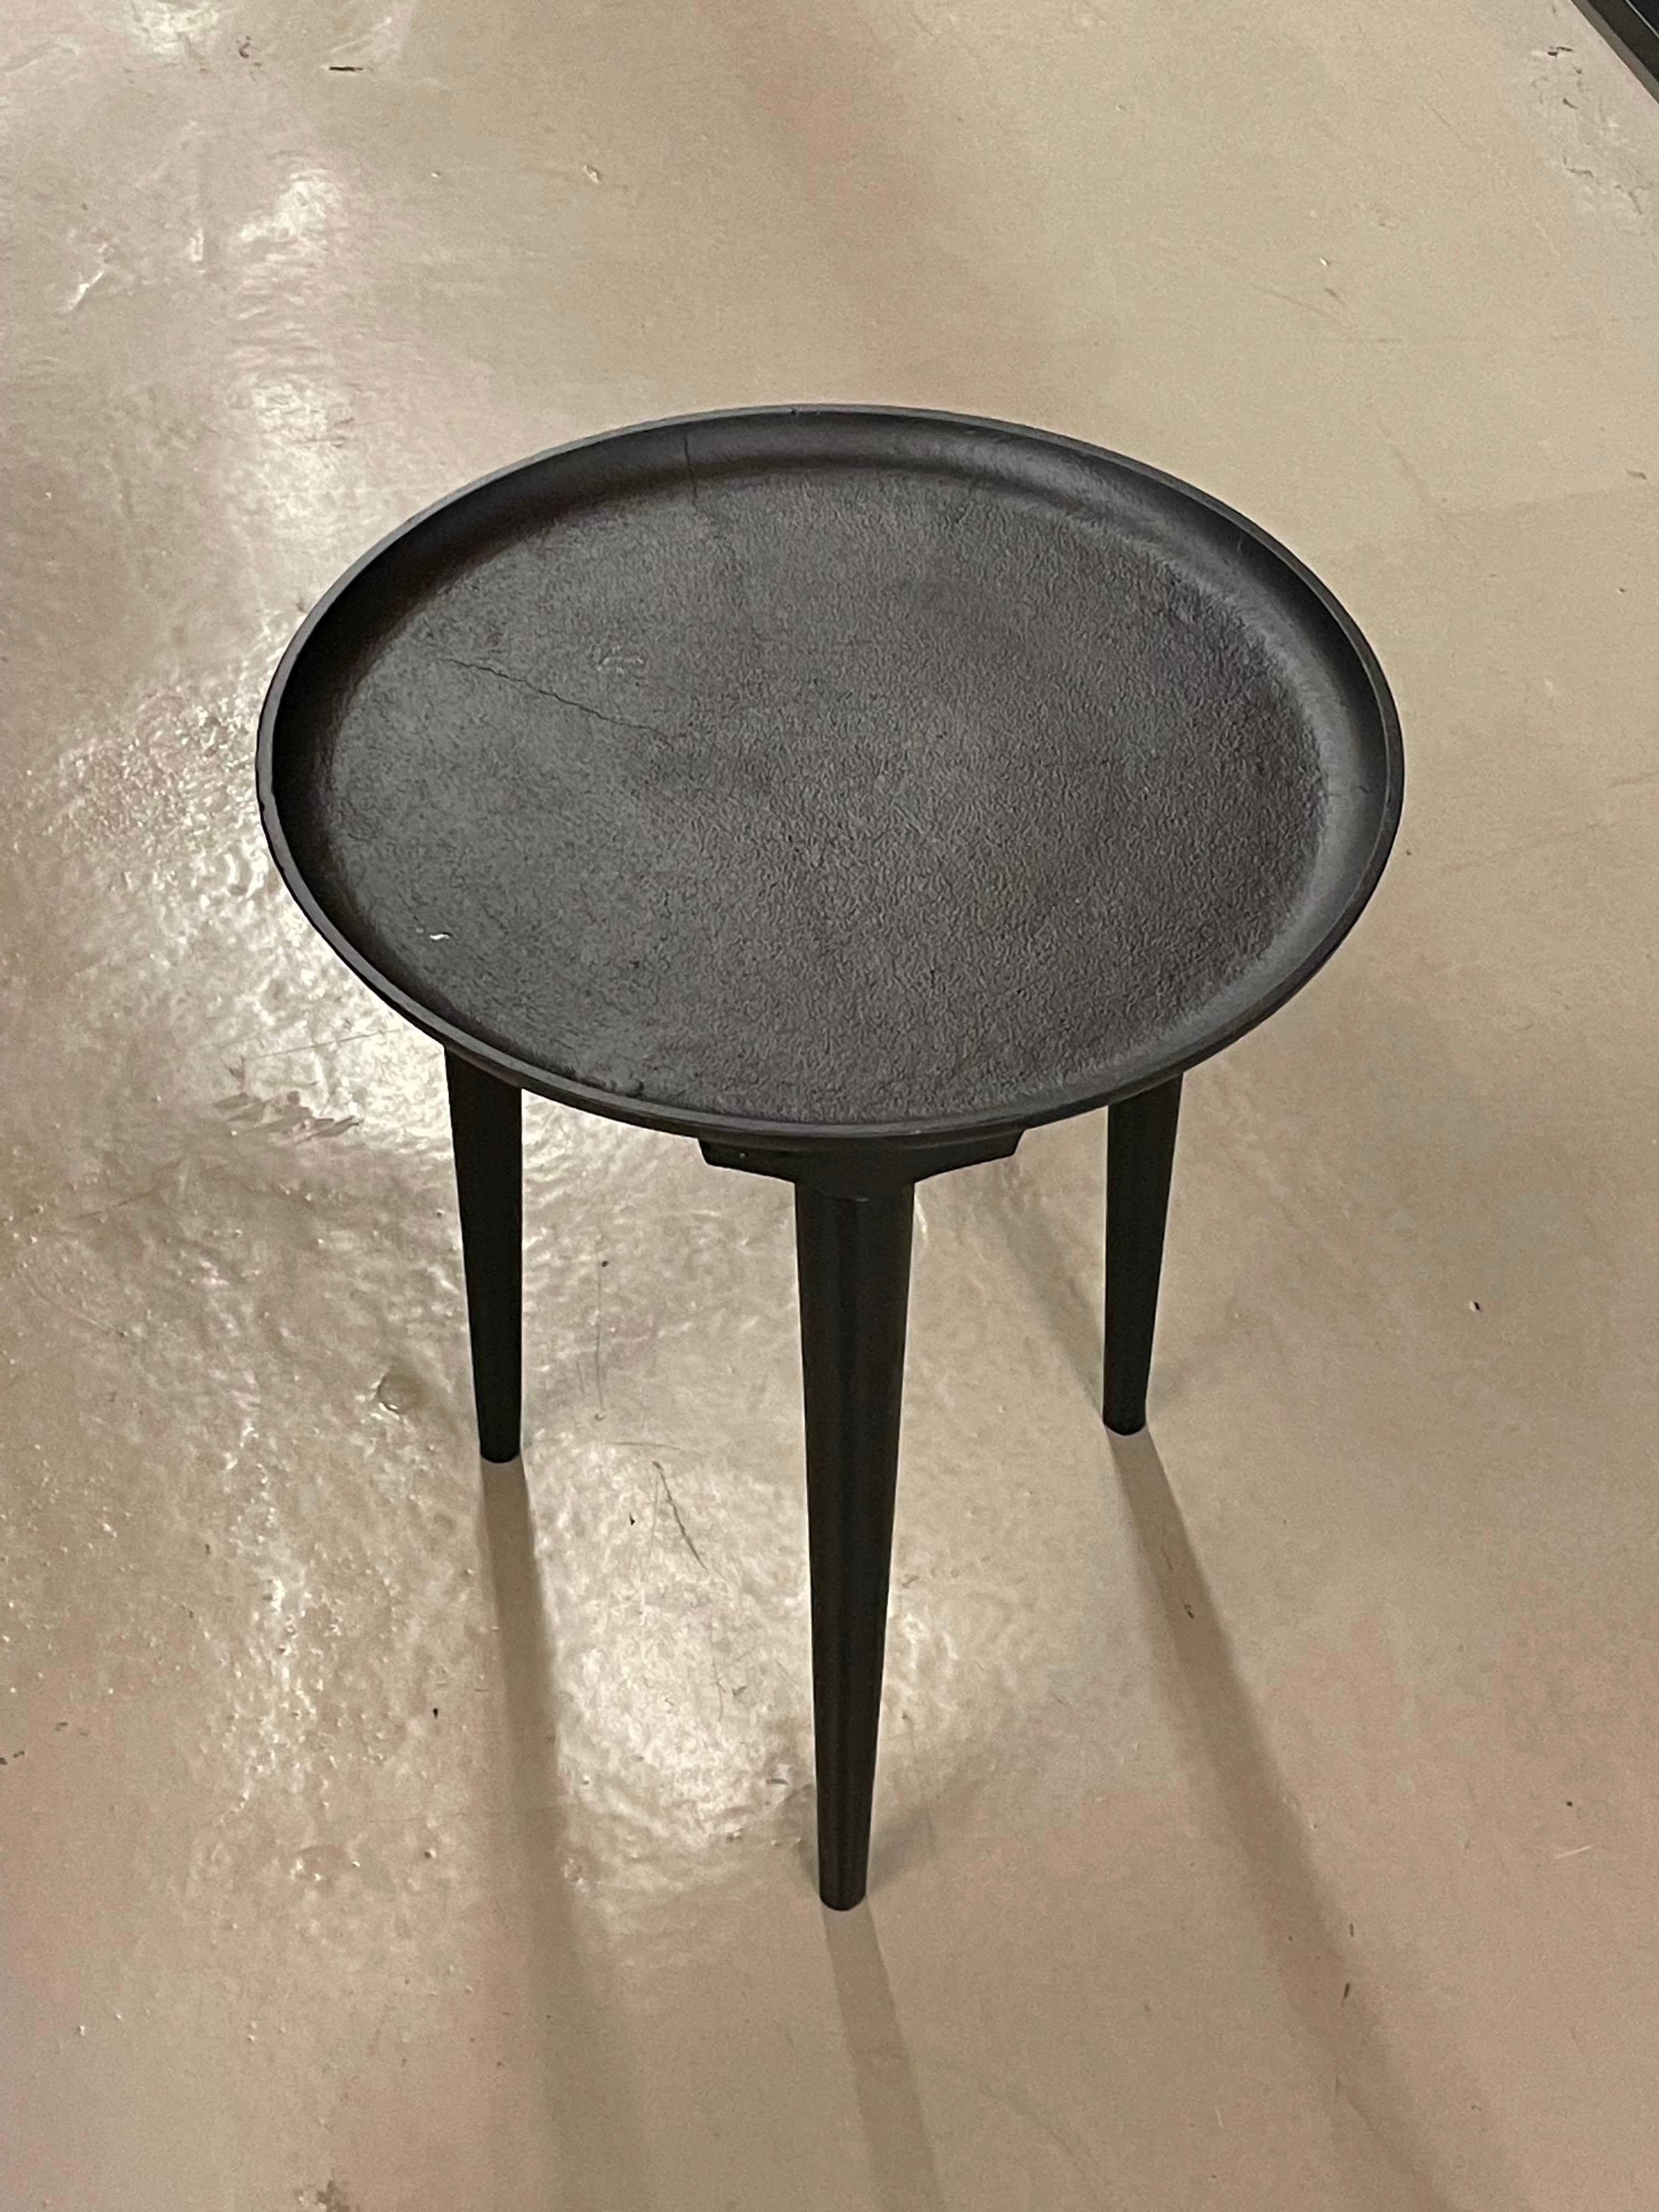 Black Iron Round Cocktail Table, India, Contemporary In New Condition For Sale In New York, NY